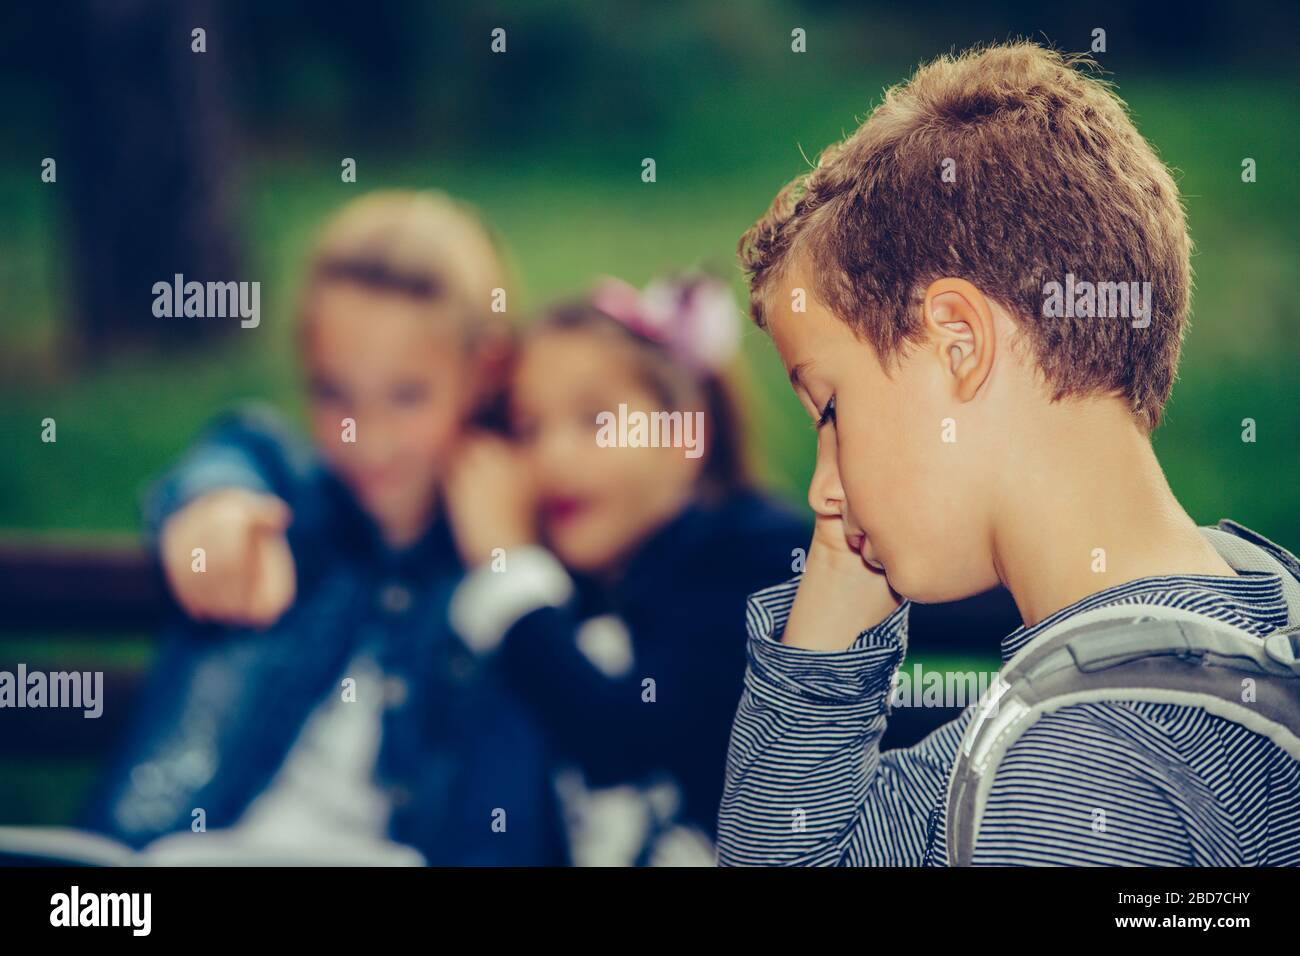 Sad boy feeling left out, teased and bullied by his classmates. Unhappy boy having problems fitting in with others at school. Stock Photo